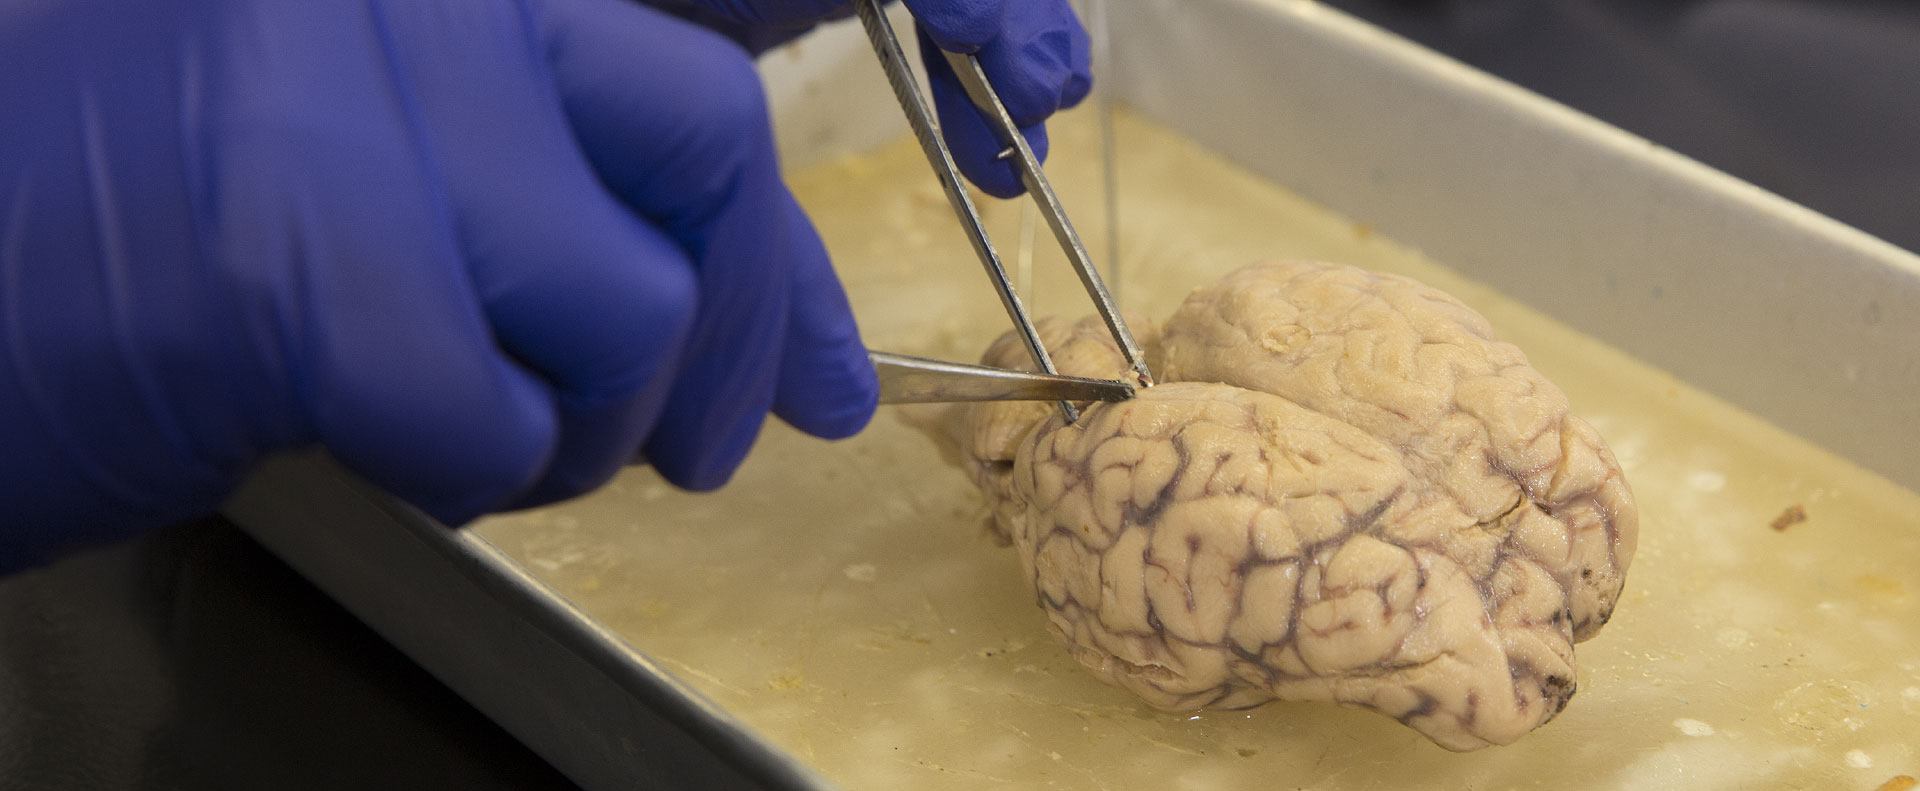 Dissecting A Brain